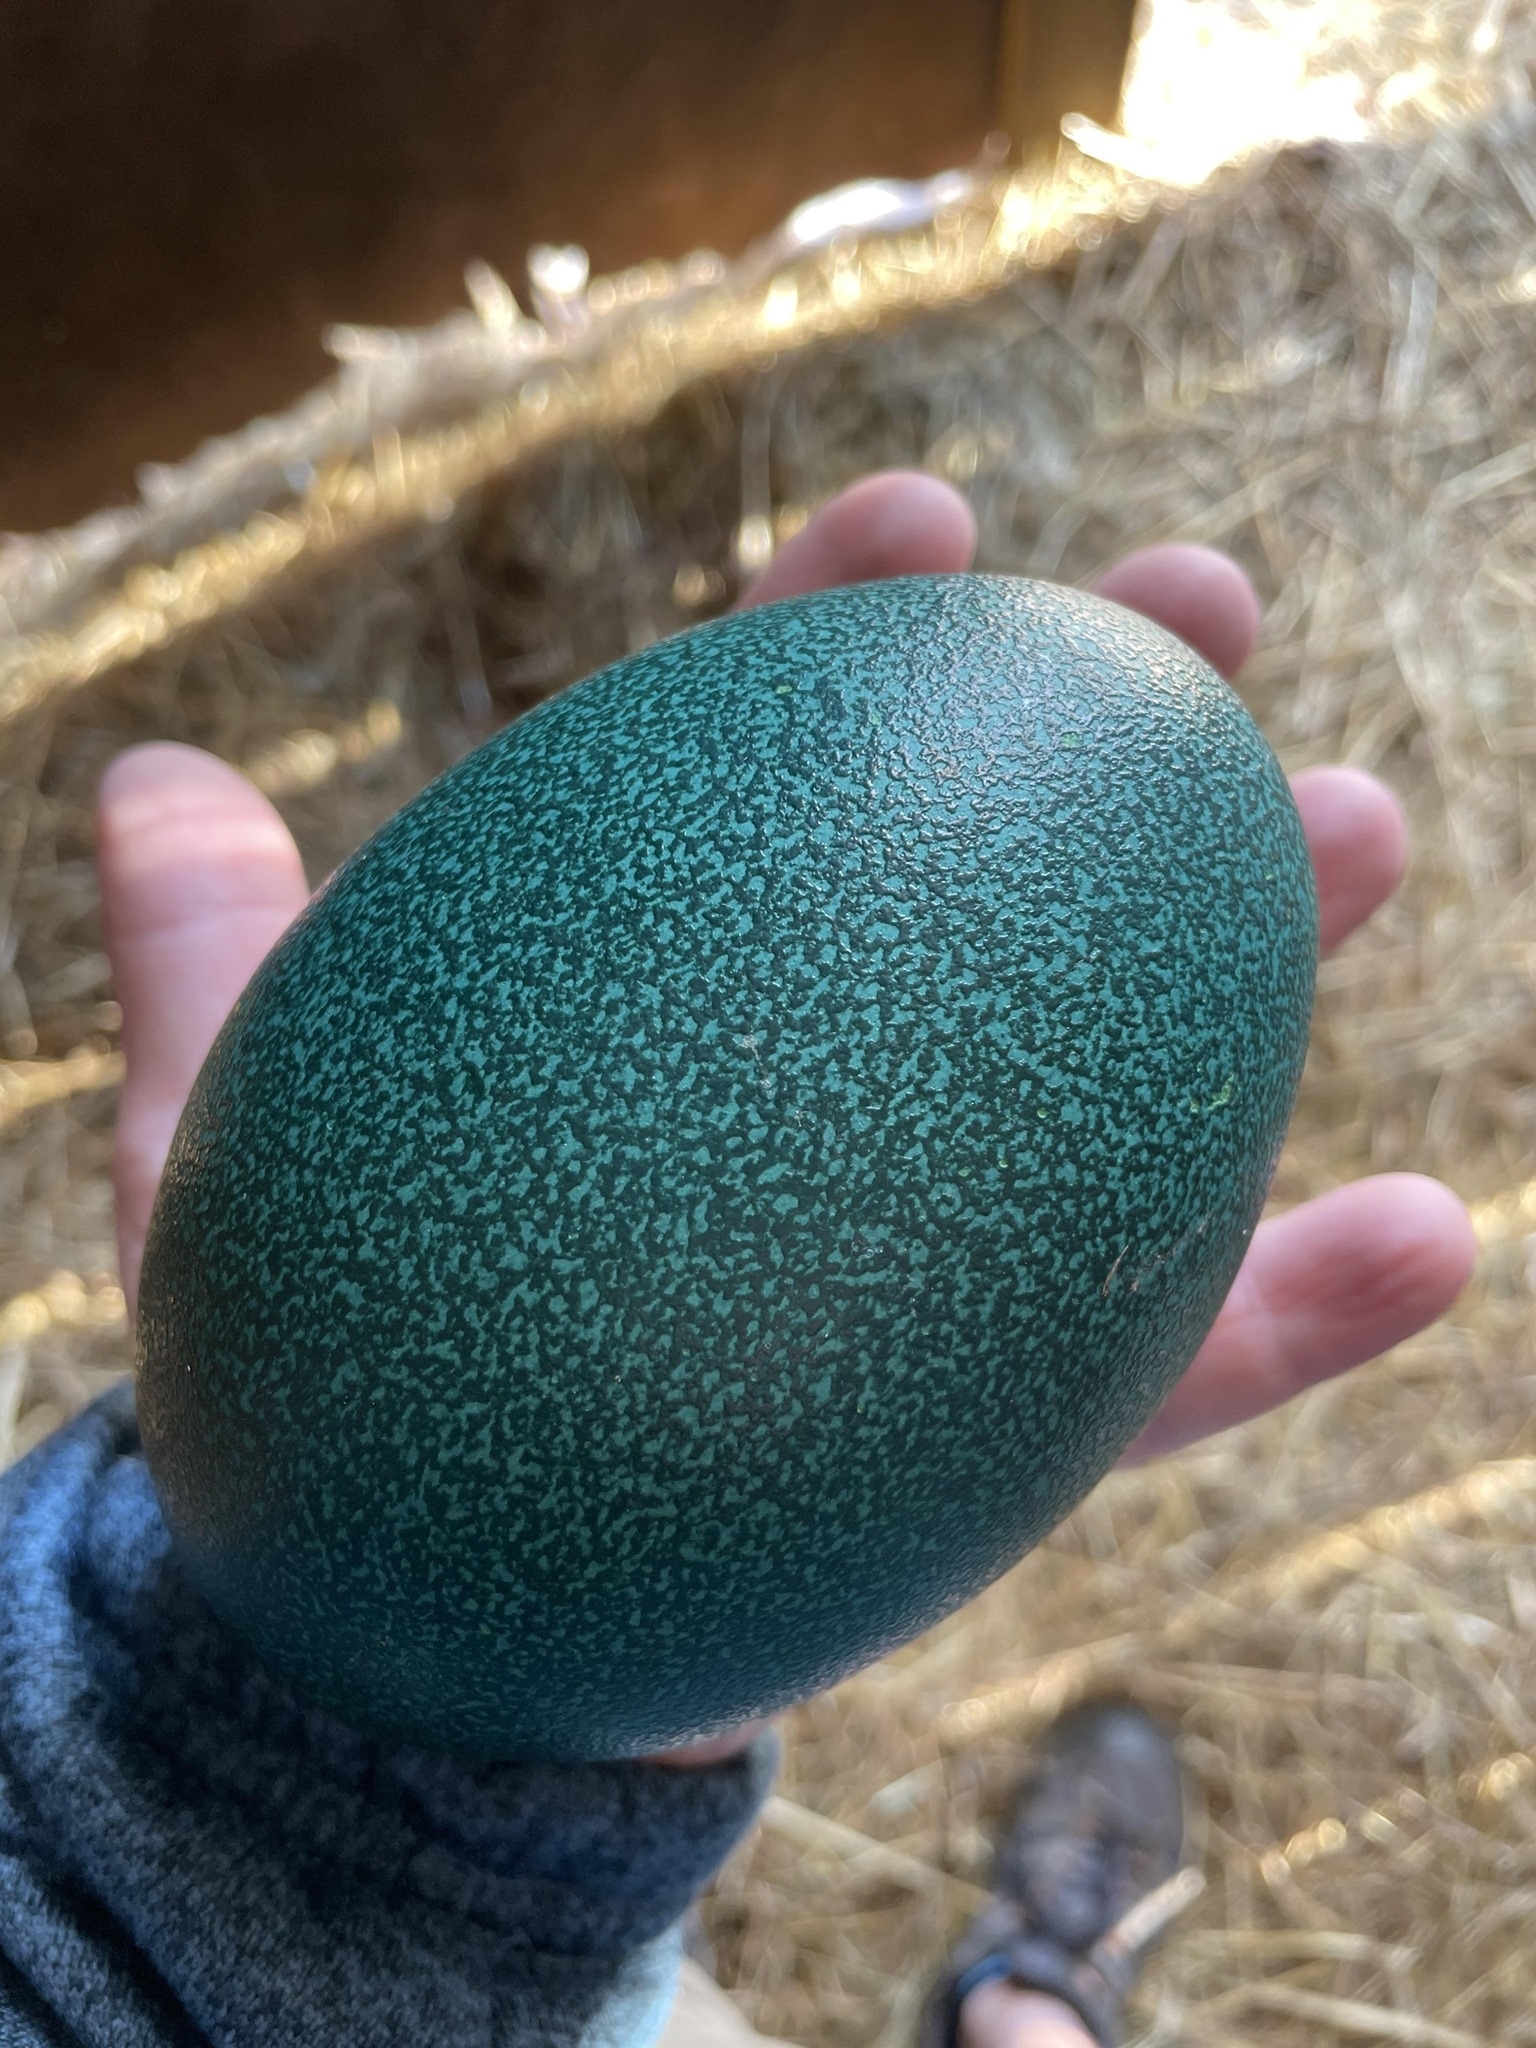 A huge blue speckled egg held in a hand